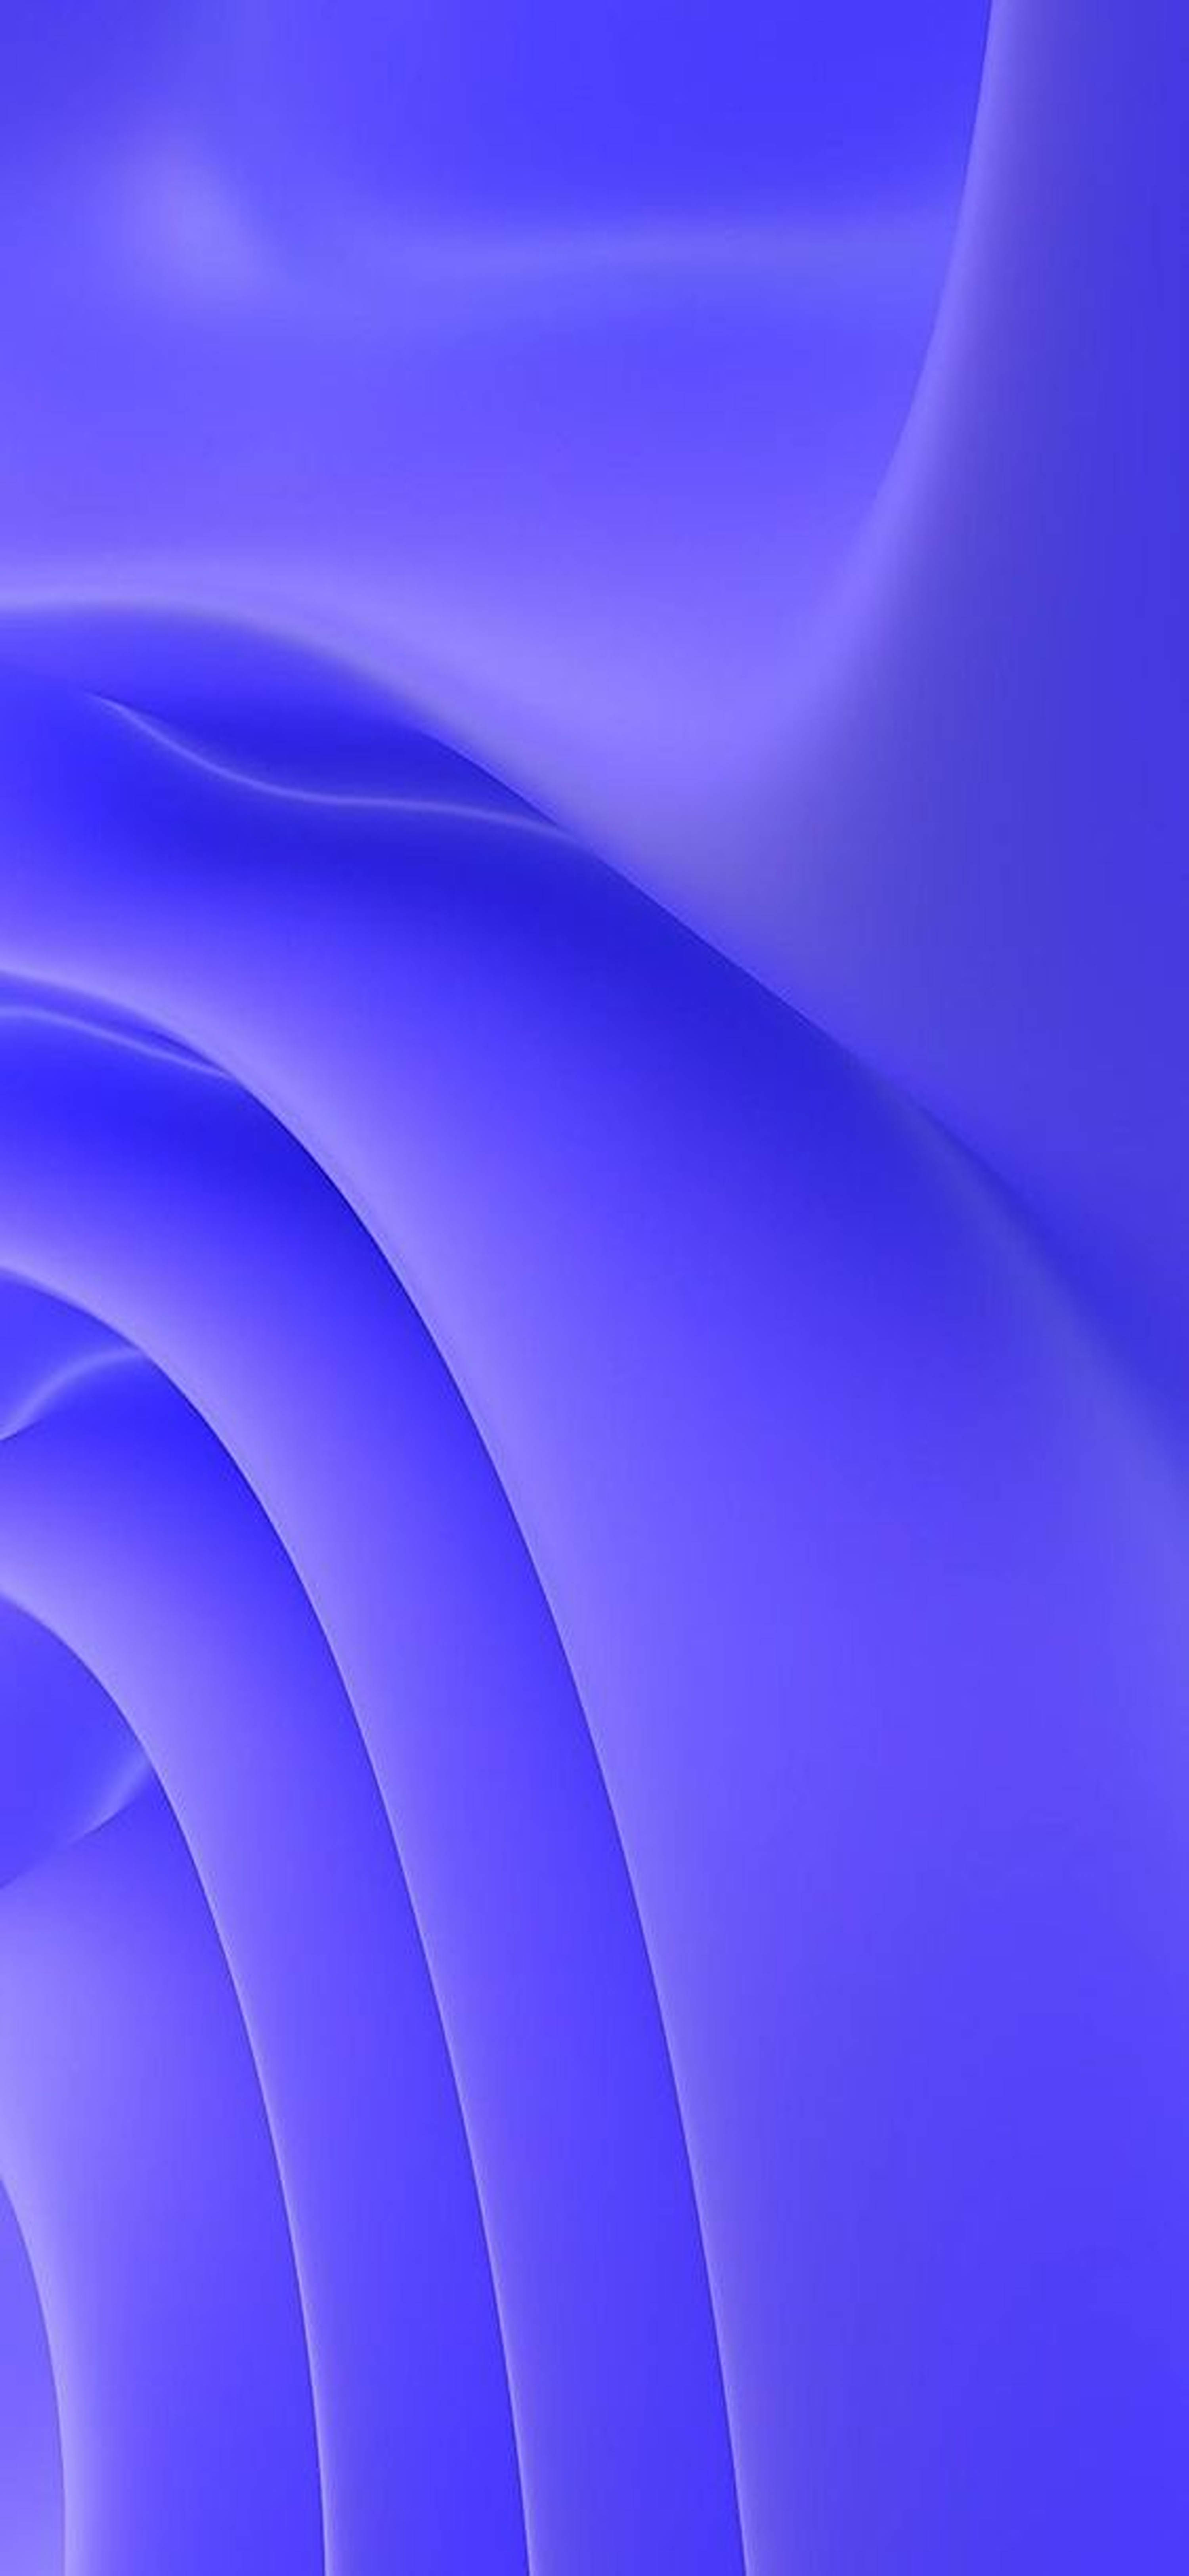 Abstract 3d Folds Redmi Note 9 Pro Wallpaper